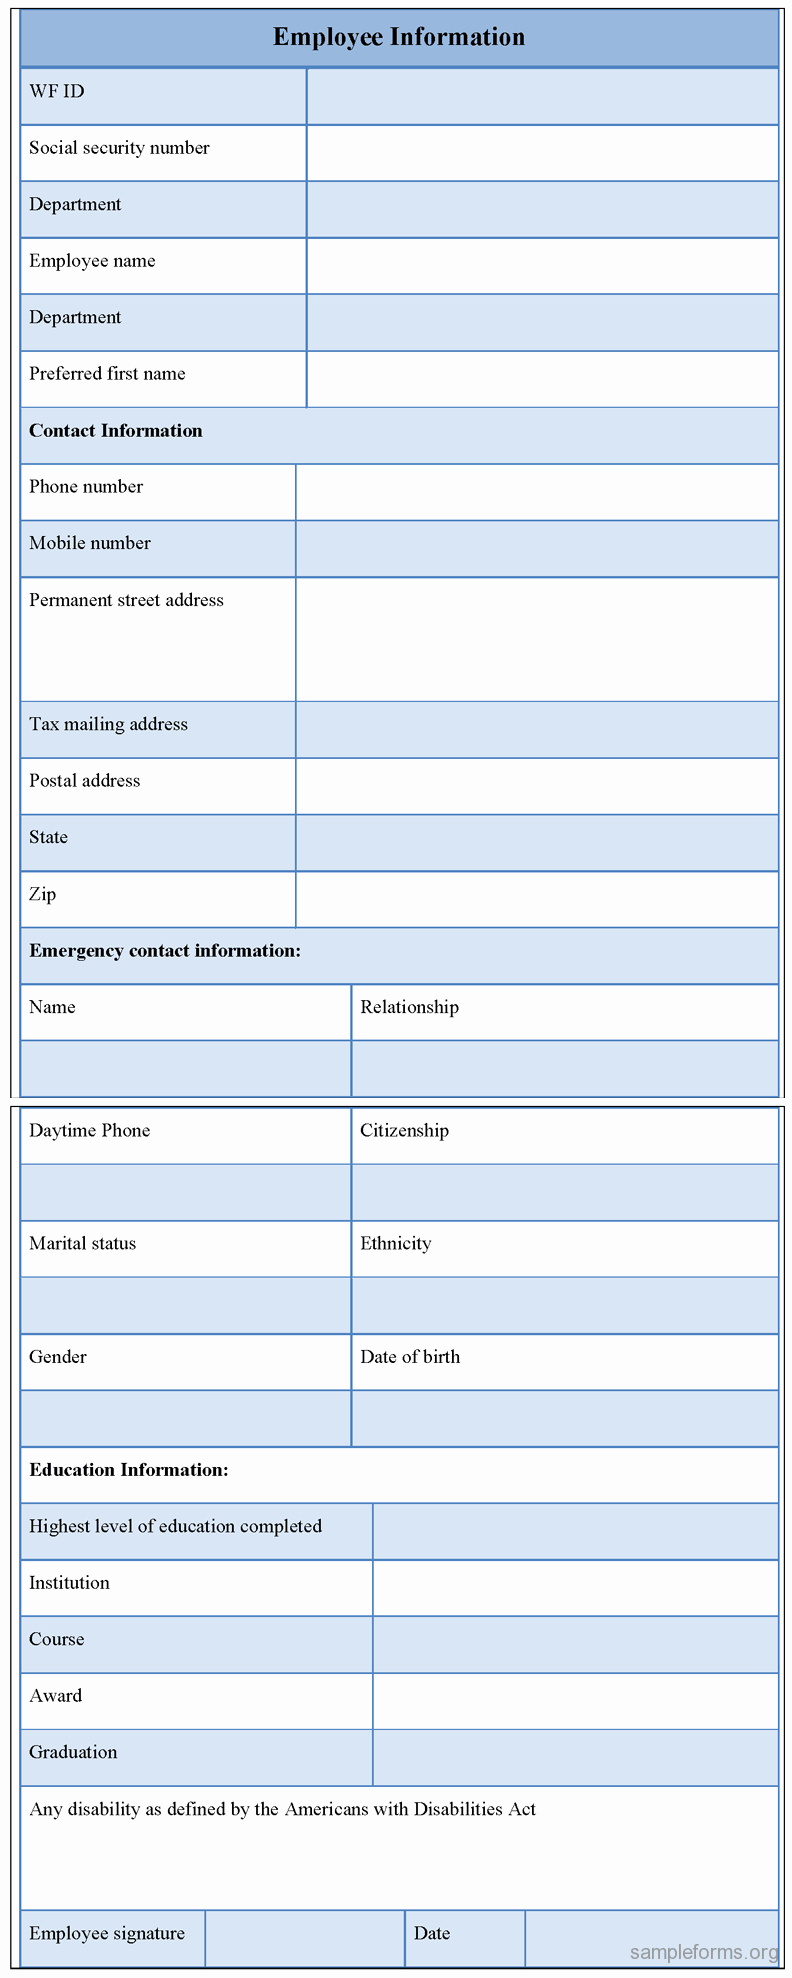 Employment Information form Template Inspirational Employee Information form Sample forms